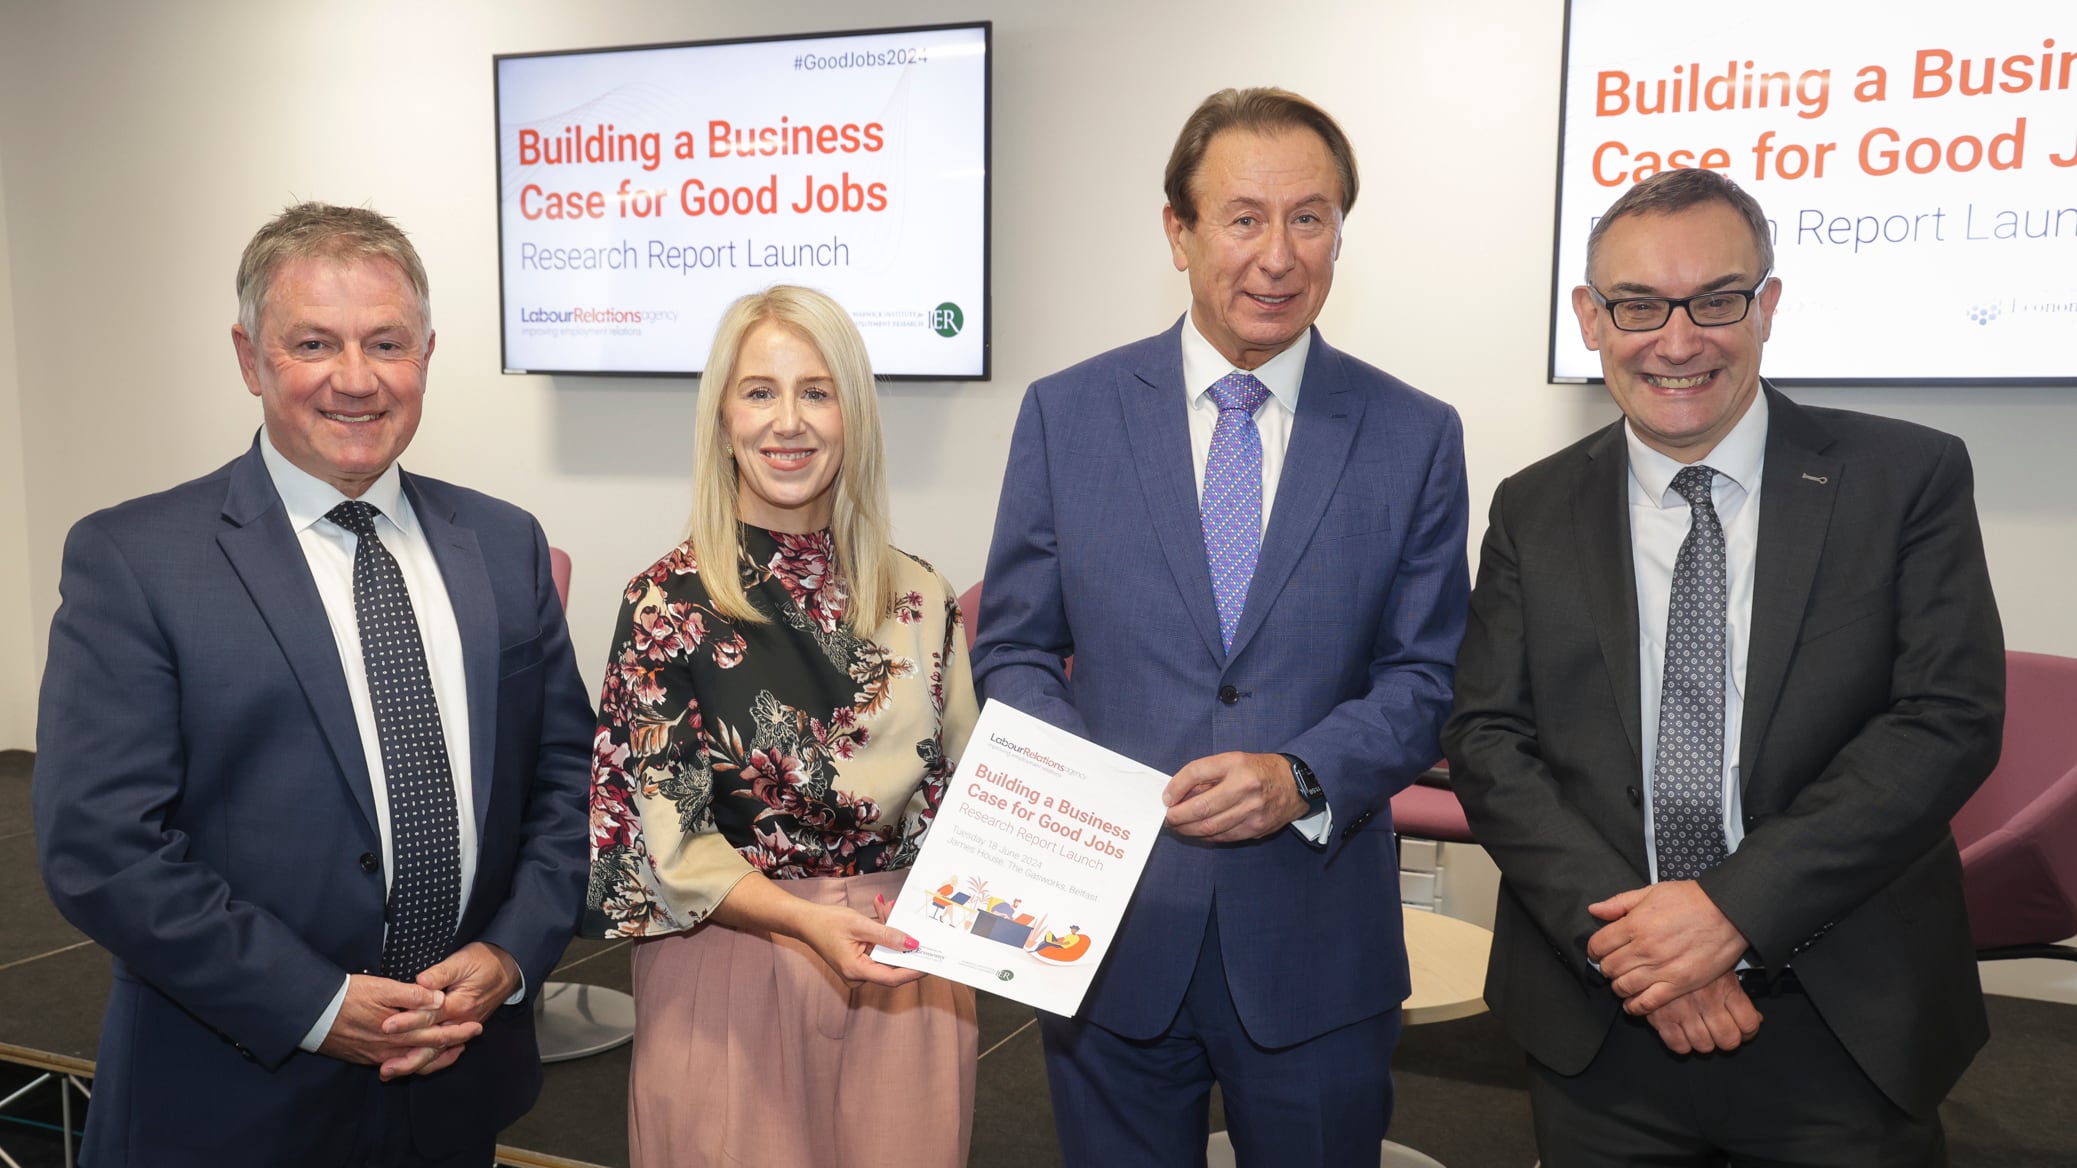 ‘Good jobs’ could help reverse the cost of workplace conflict in Northern Ireland, which burdens employers and the region's economy with around £1 billion in costs each year.